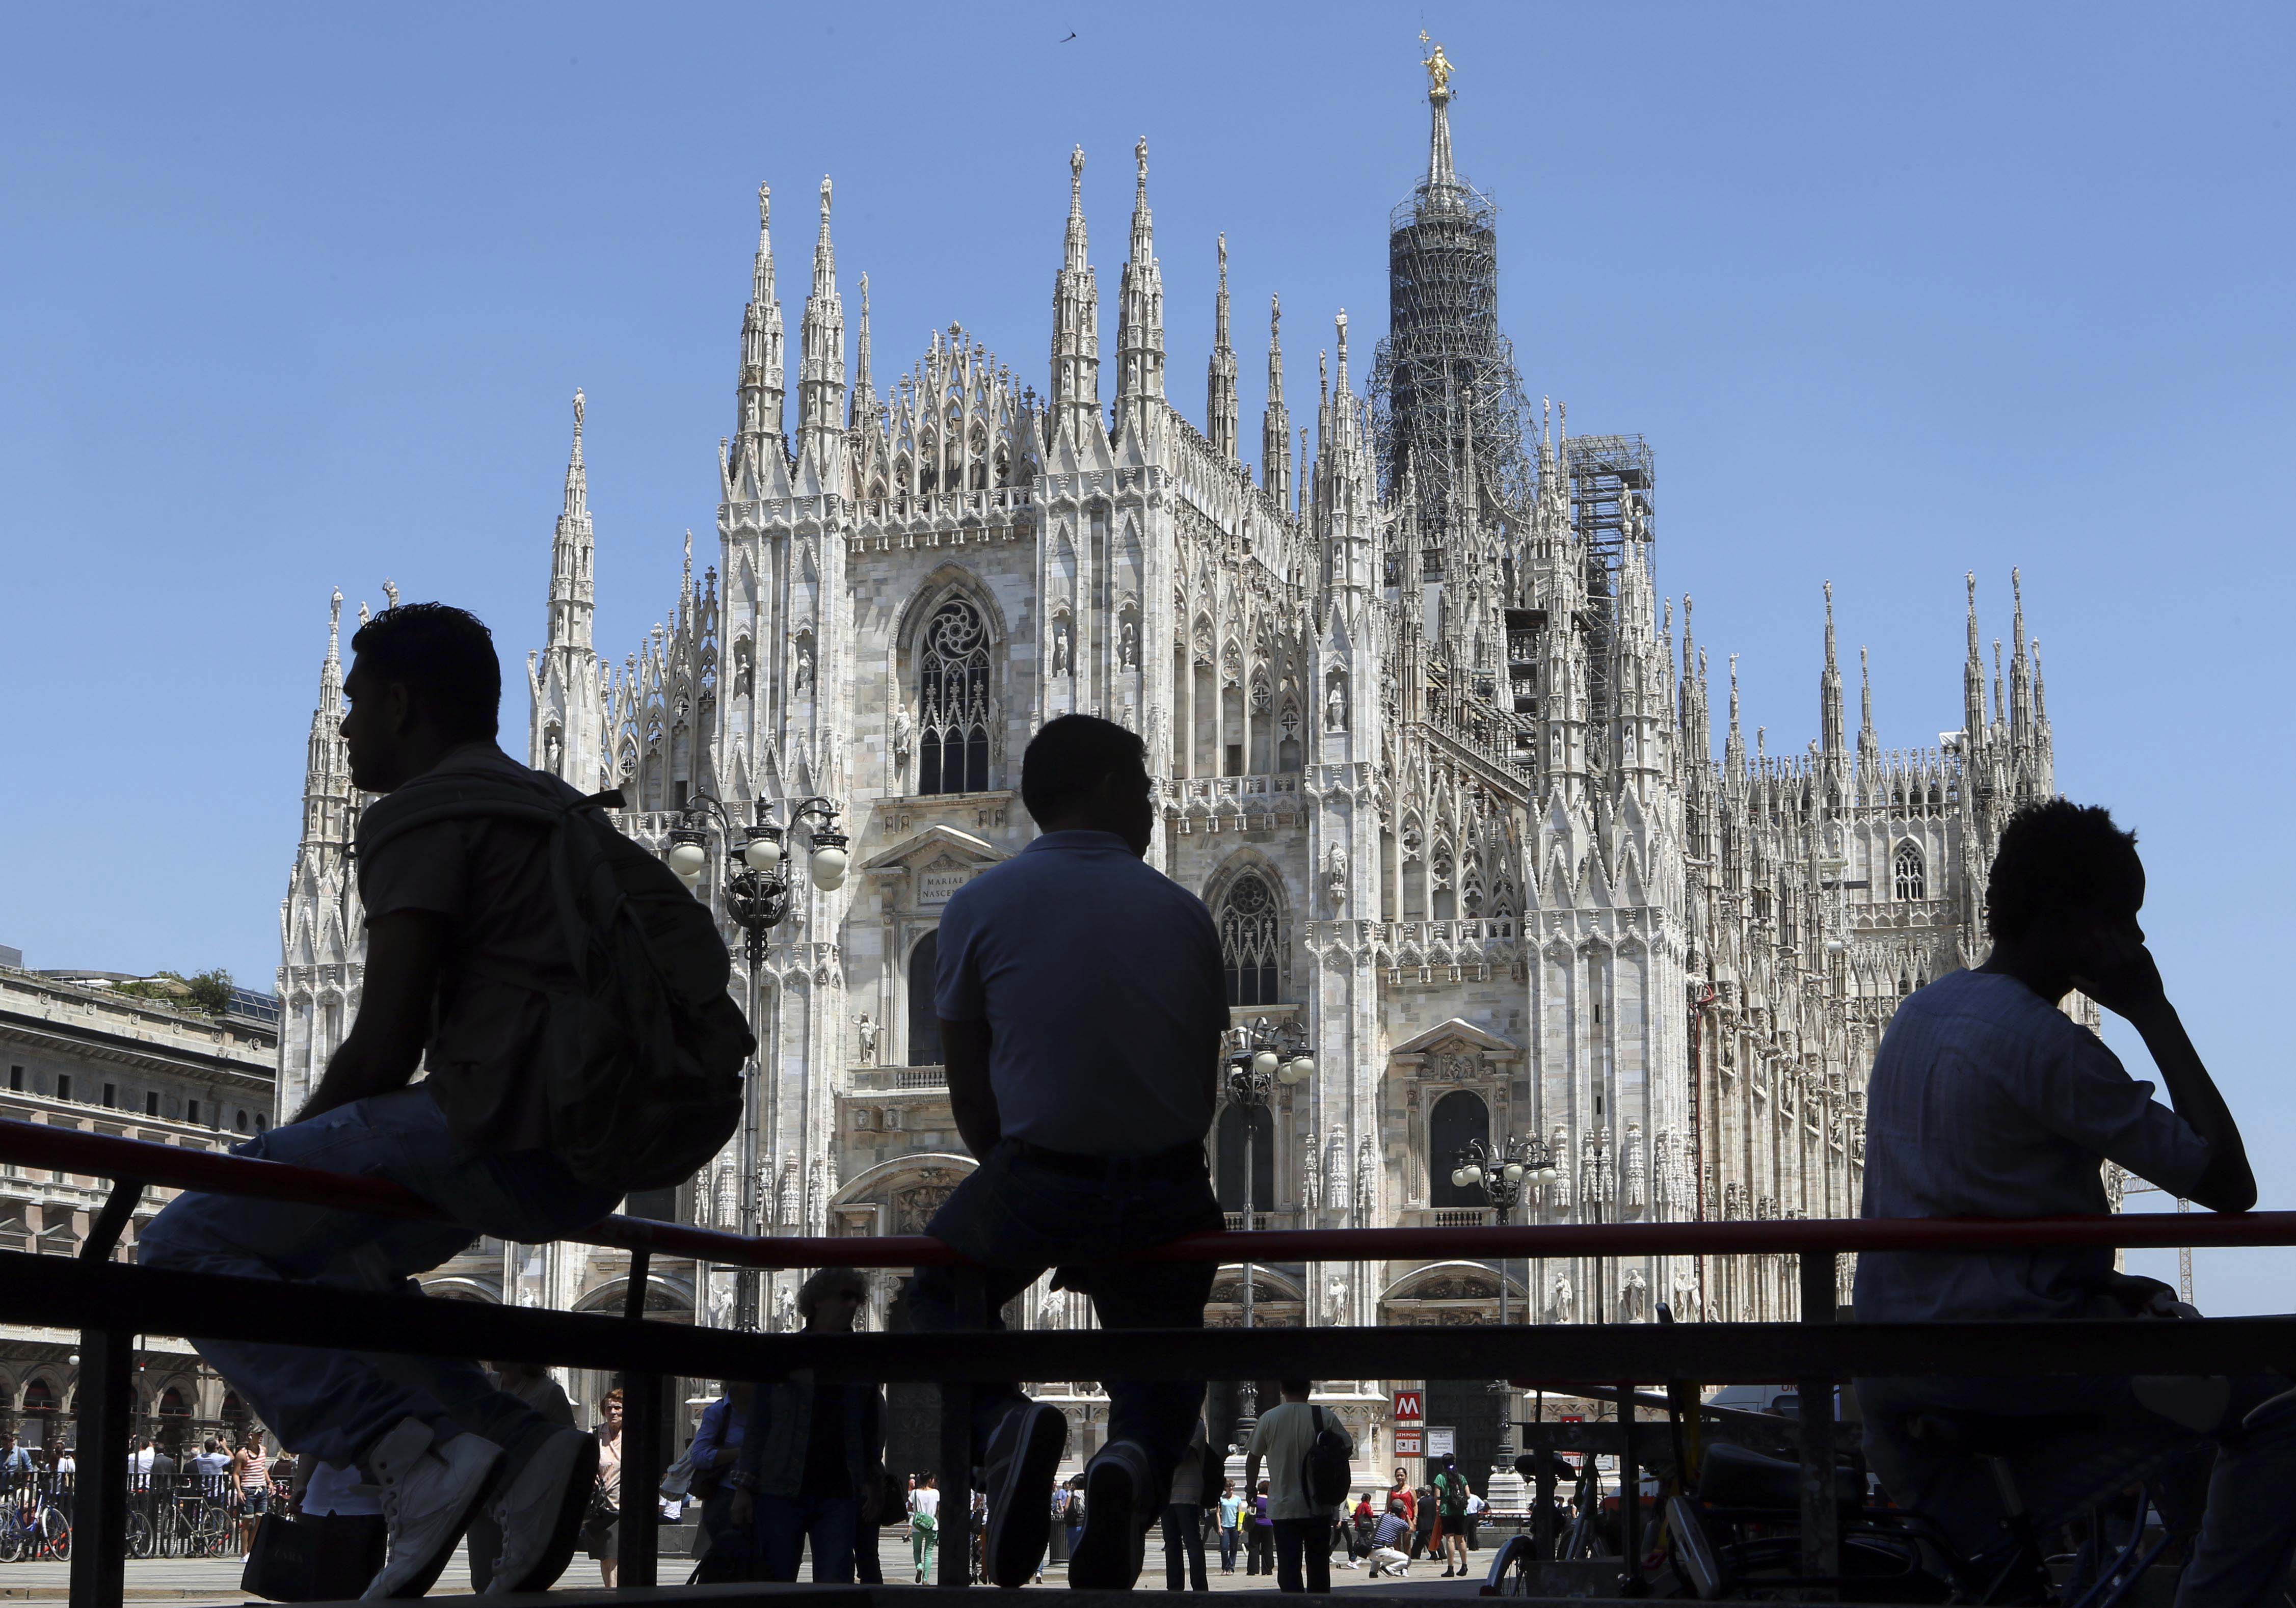 People are silhouetted as they sit in front of the Duomo gothic cathedral in Milan, Italy, Tuesday, June 11, 2013. (AP Photo/Luca Bruno)